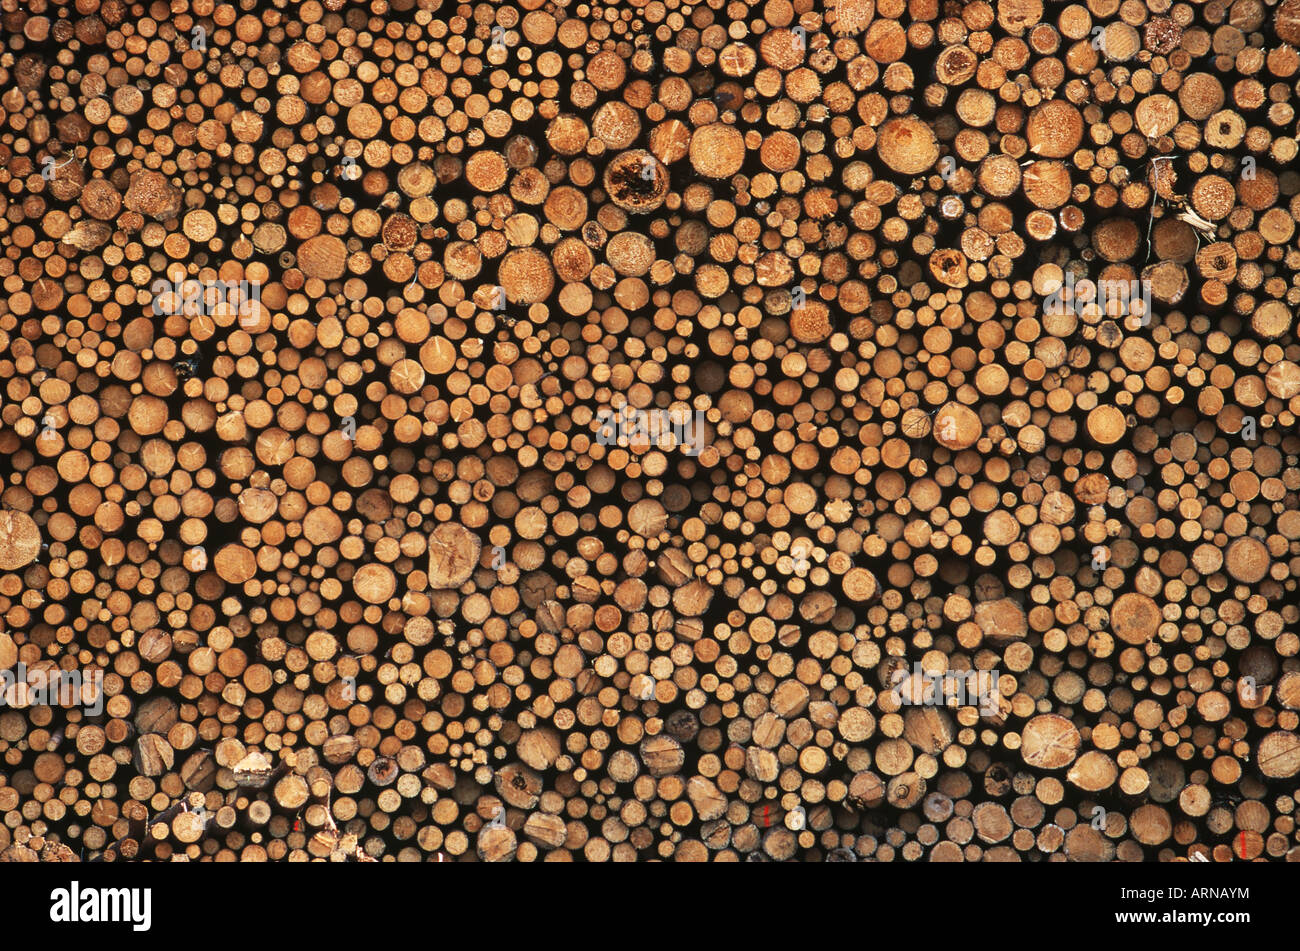 Pulp wood stacked in processing yard, British Columbia, Canada. Stock Photo